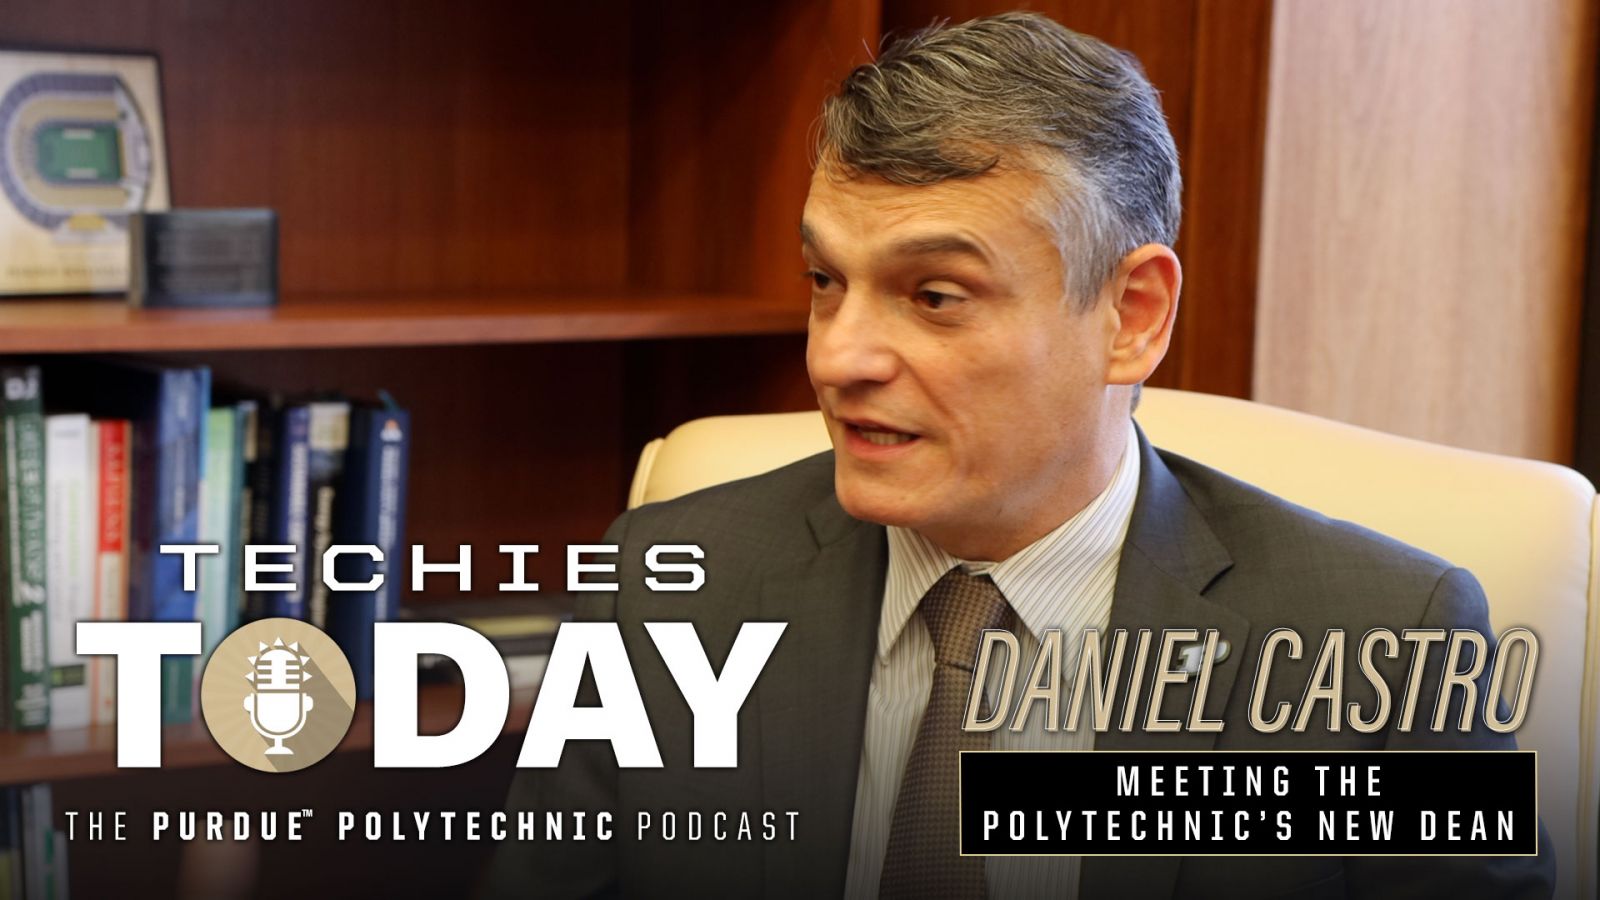 Daniel Castro, Meeting the Polytechnic's New Dean, on Techies Today, the Purdue Polytechnic Podcast